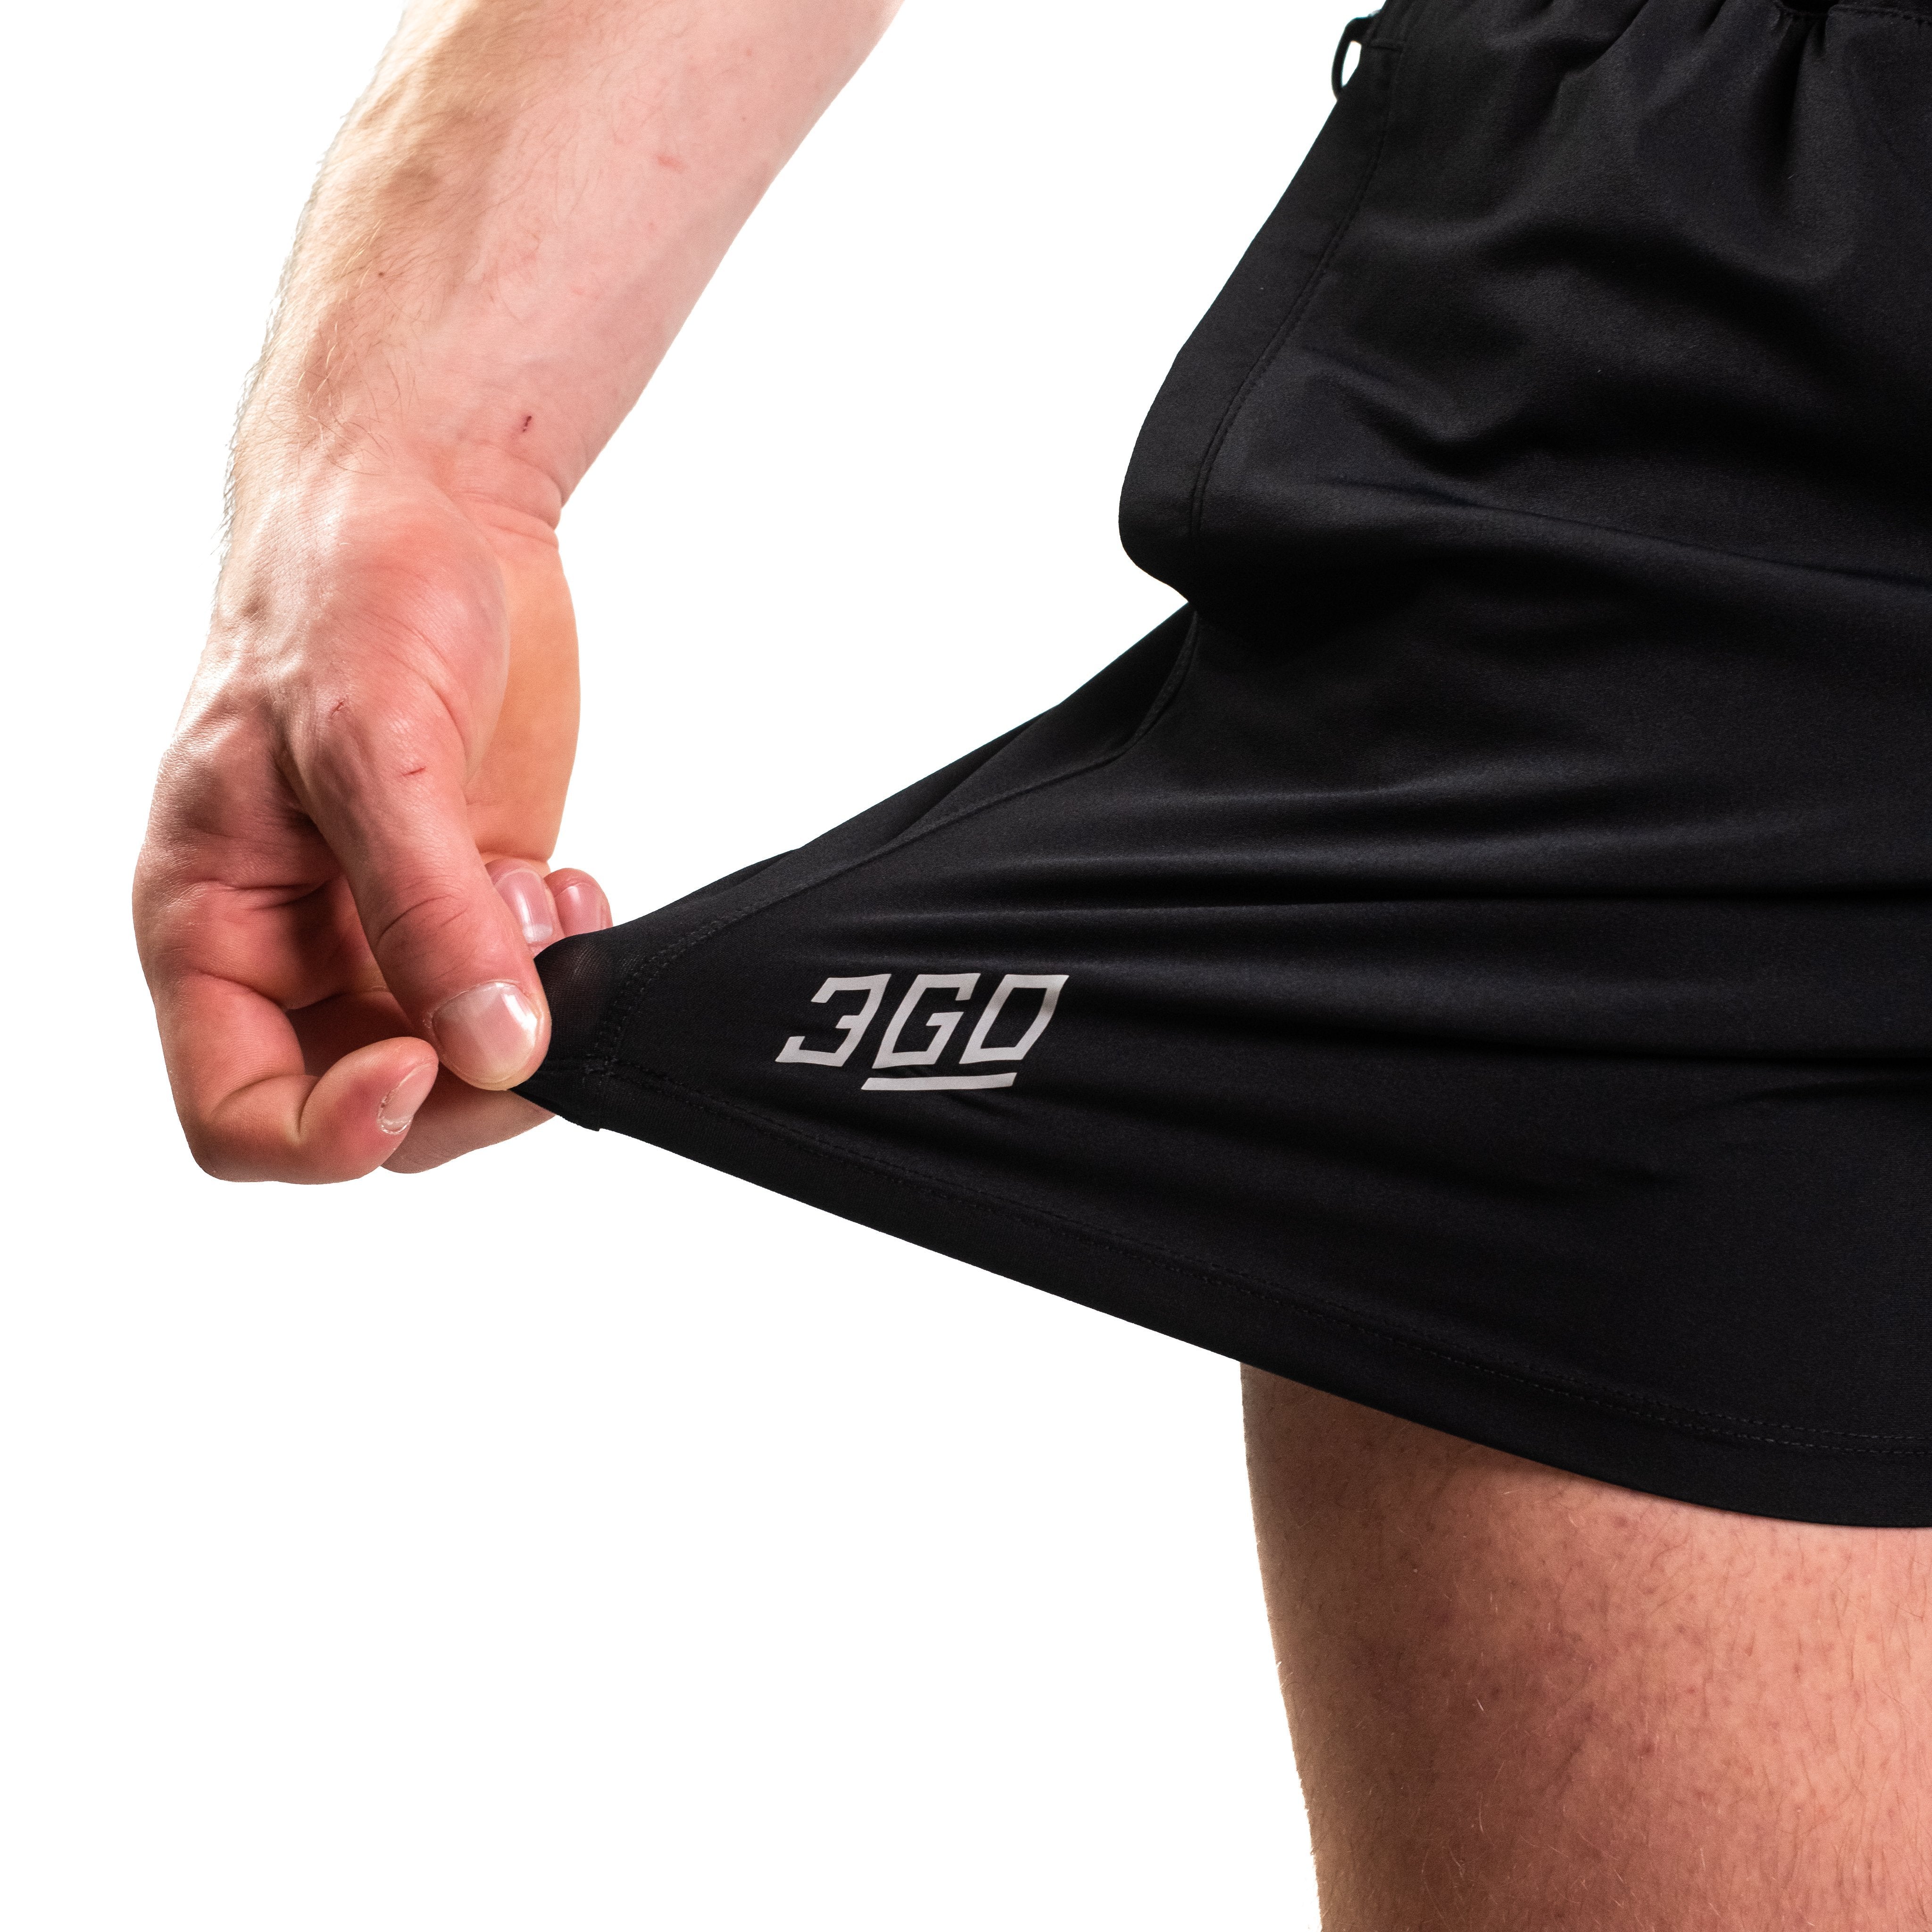 360-GO KWD shorts were created to provide the flexibility for all the movements in your training while offering the comfort and fit you have come to love through our KWD shorts. These shorts offer a slightly shorter length to accentuate the muscles of your upper leg along with 360 degrees of stretch in all angles and allow you to remain comfortable without limiting any movement in both training and life environments. 